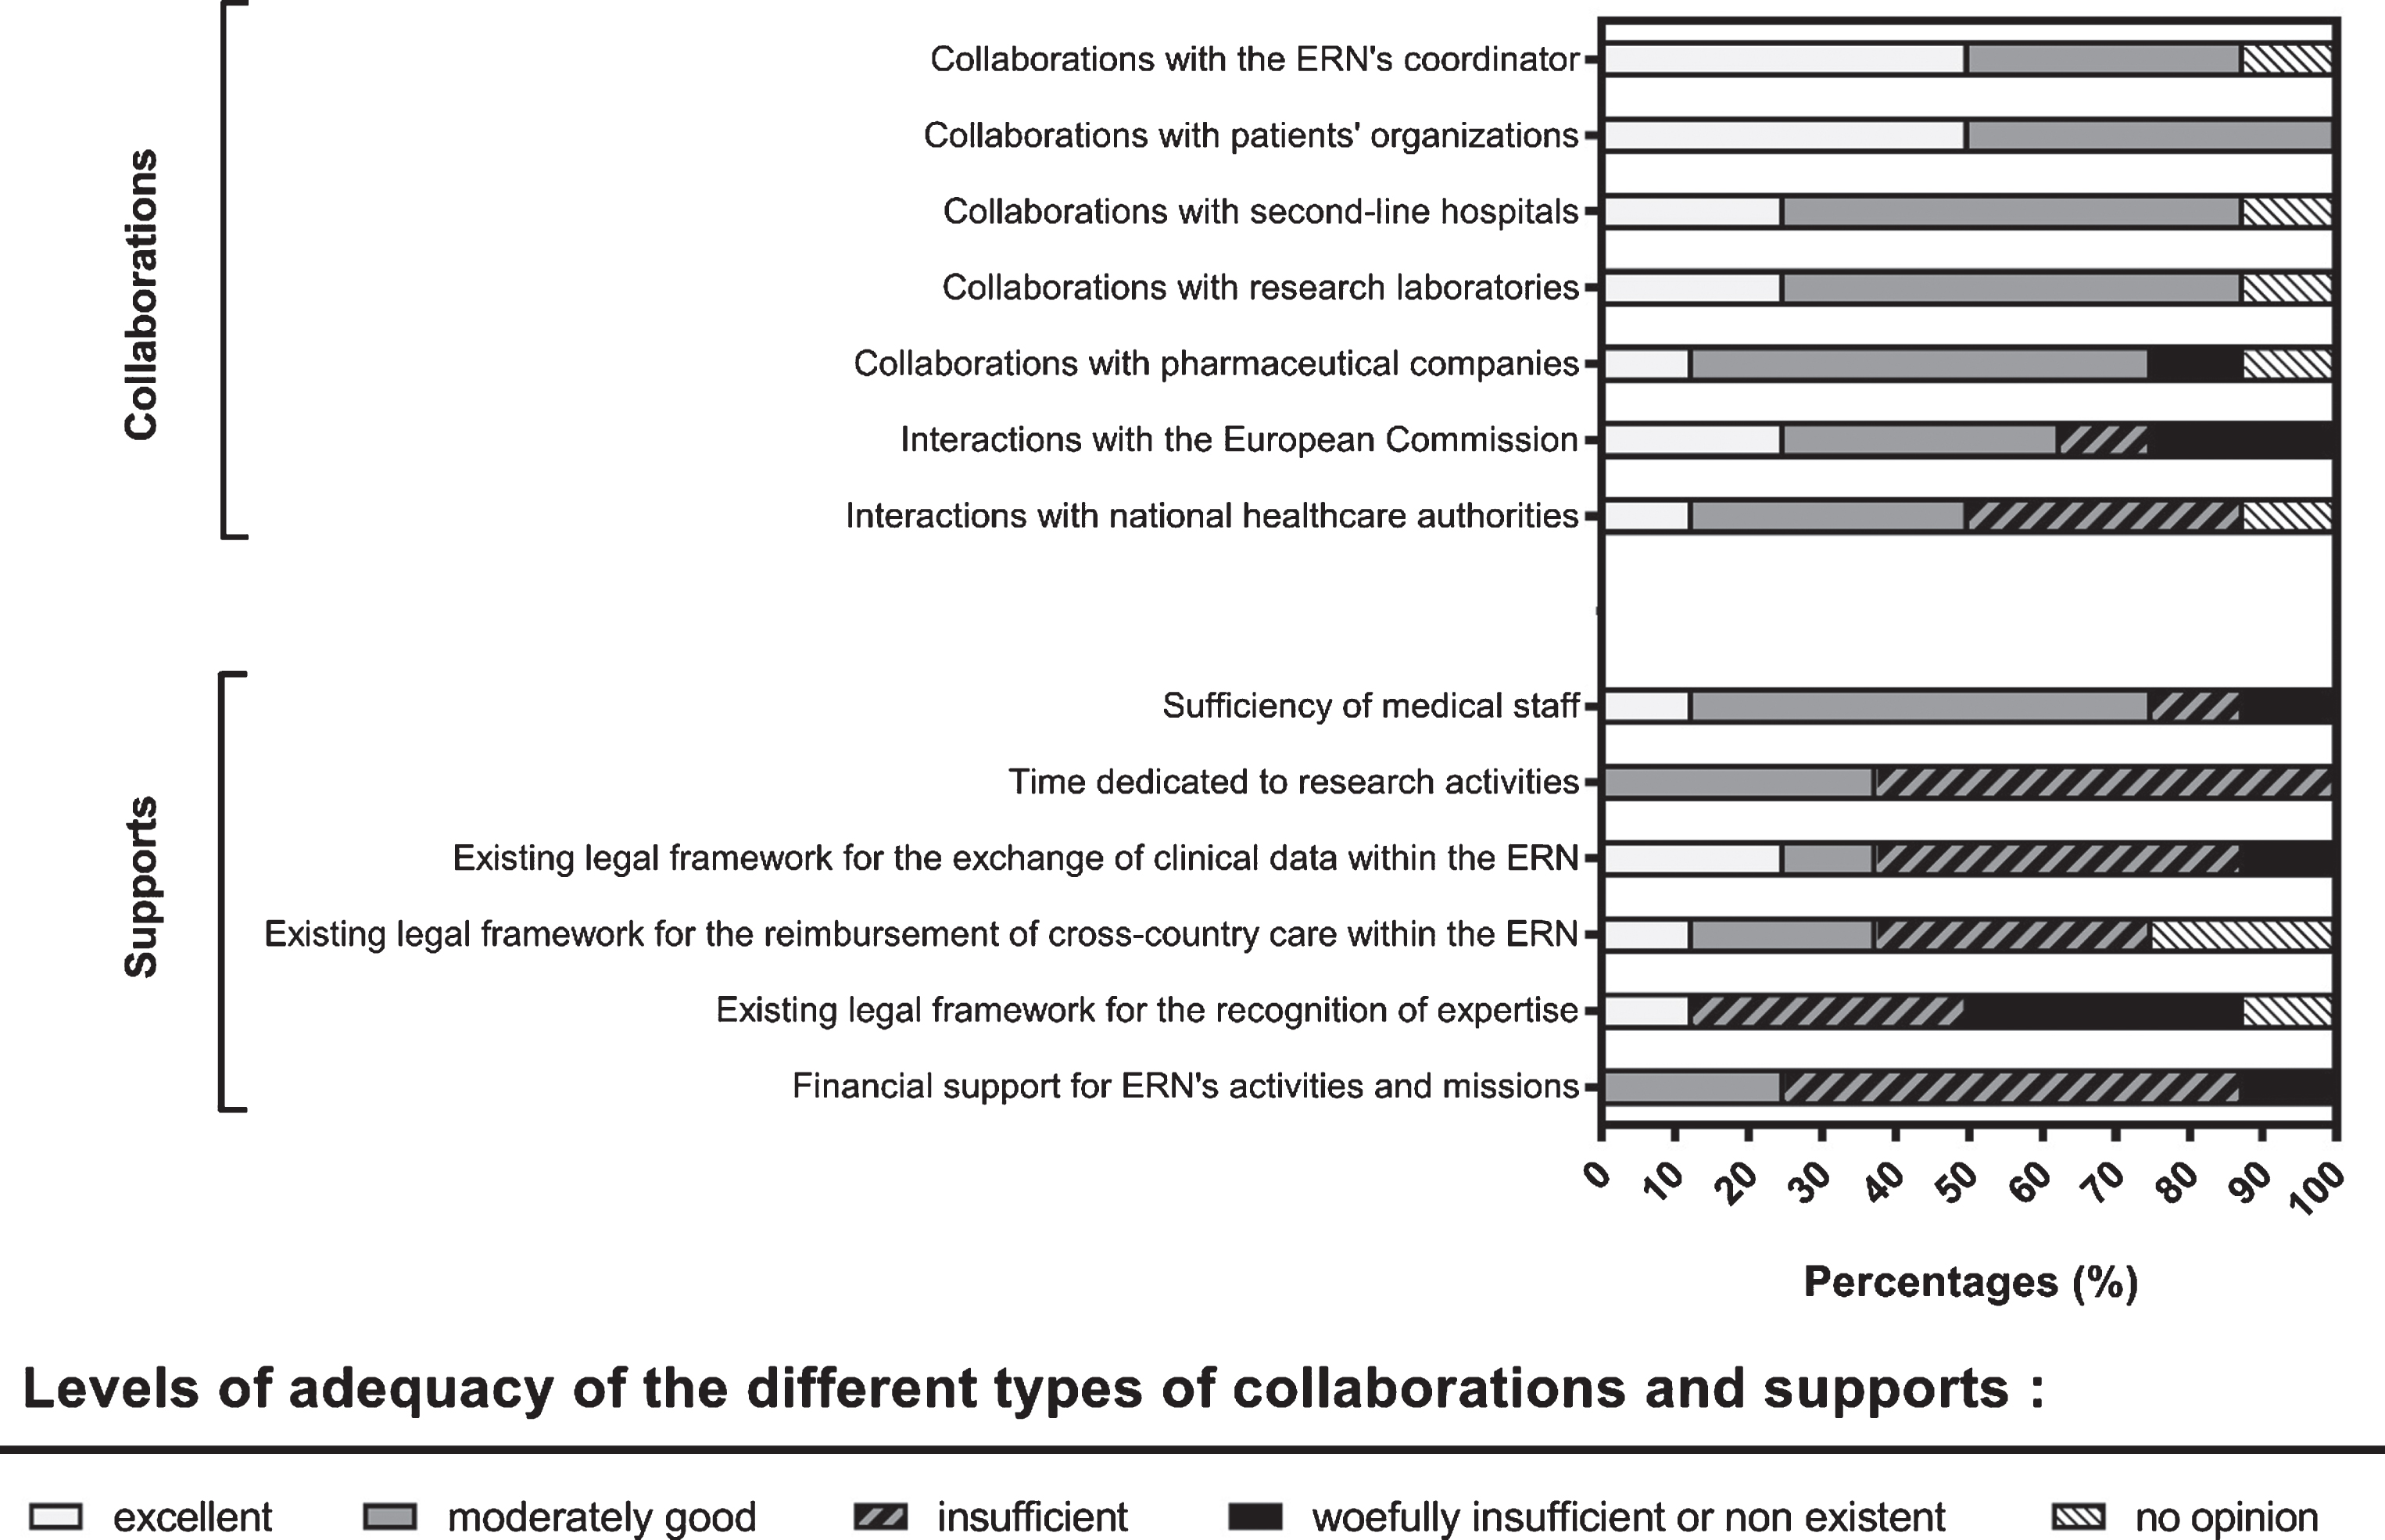 Evaluation of the adequacy of different types of collaborations and supports of European Reference Networks (ERNs). The horizontal stacked bar charts represent the rates (expressed in percentages) of participants who reported each of the categories used to evaluate the adequacy of different types of collaborations and supports. The level of adequacy was evaluated in a categorical way (excellent [white]; moderately good [light grey]; insufficient [grey hatched area]; woefully insufficient or non-existent [black]; no opinion [white hatched area]).